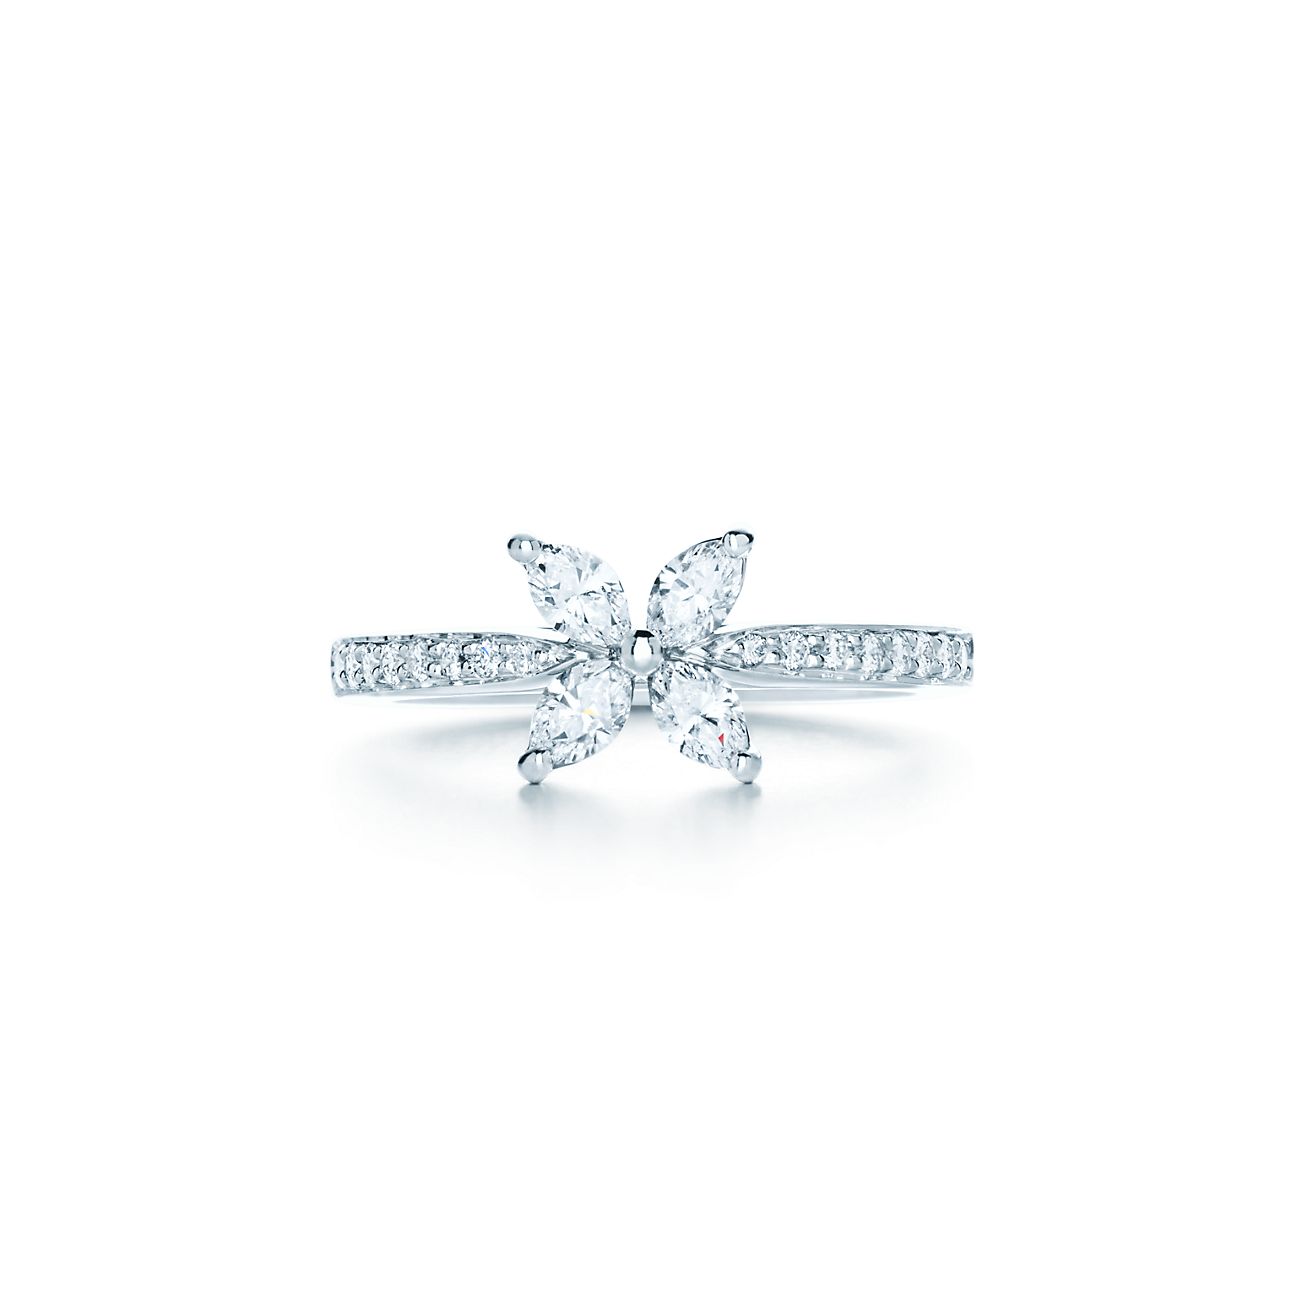 Tiffany Victoria® ring in platinum with 